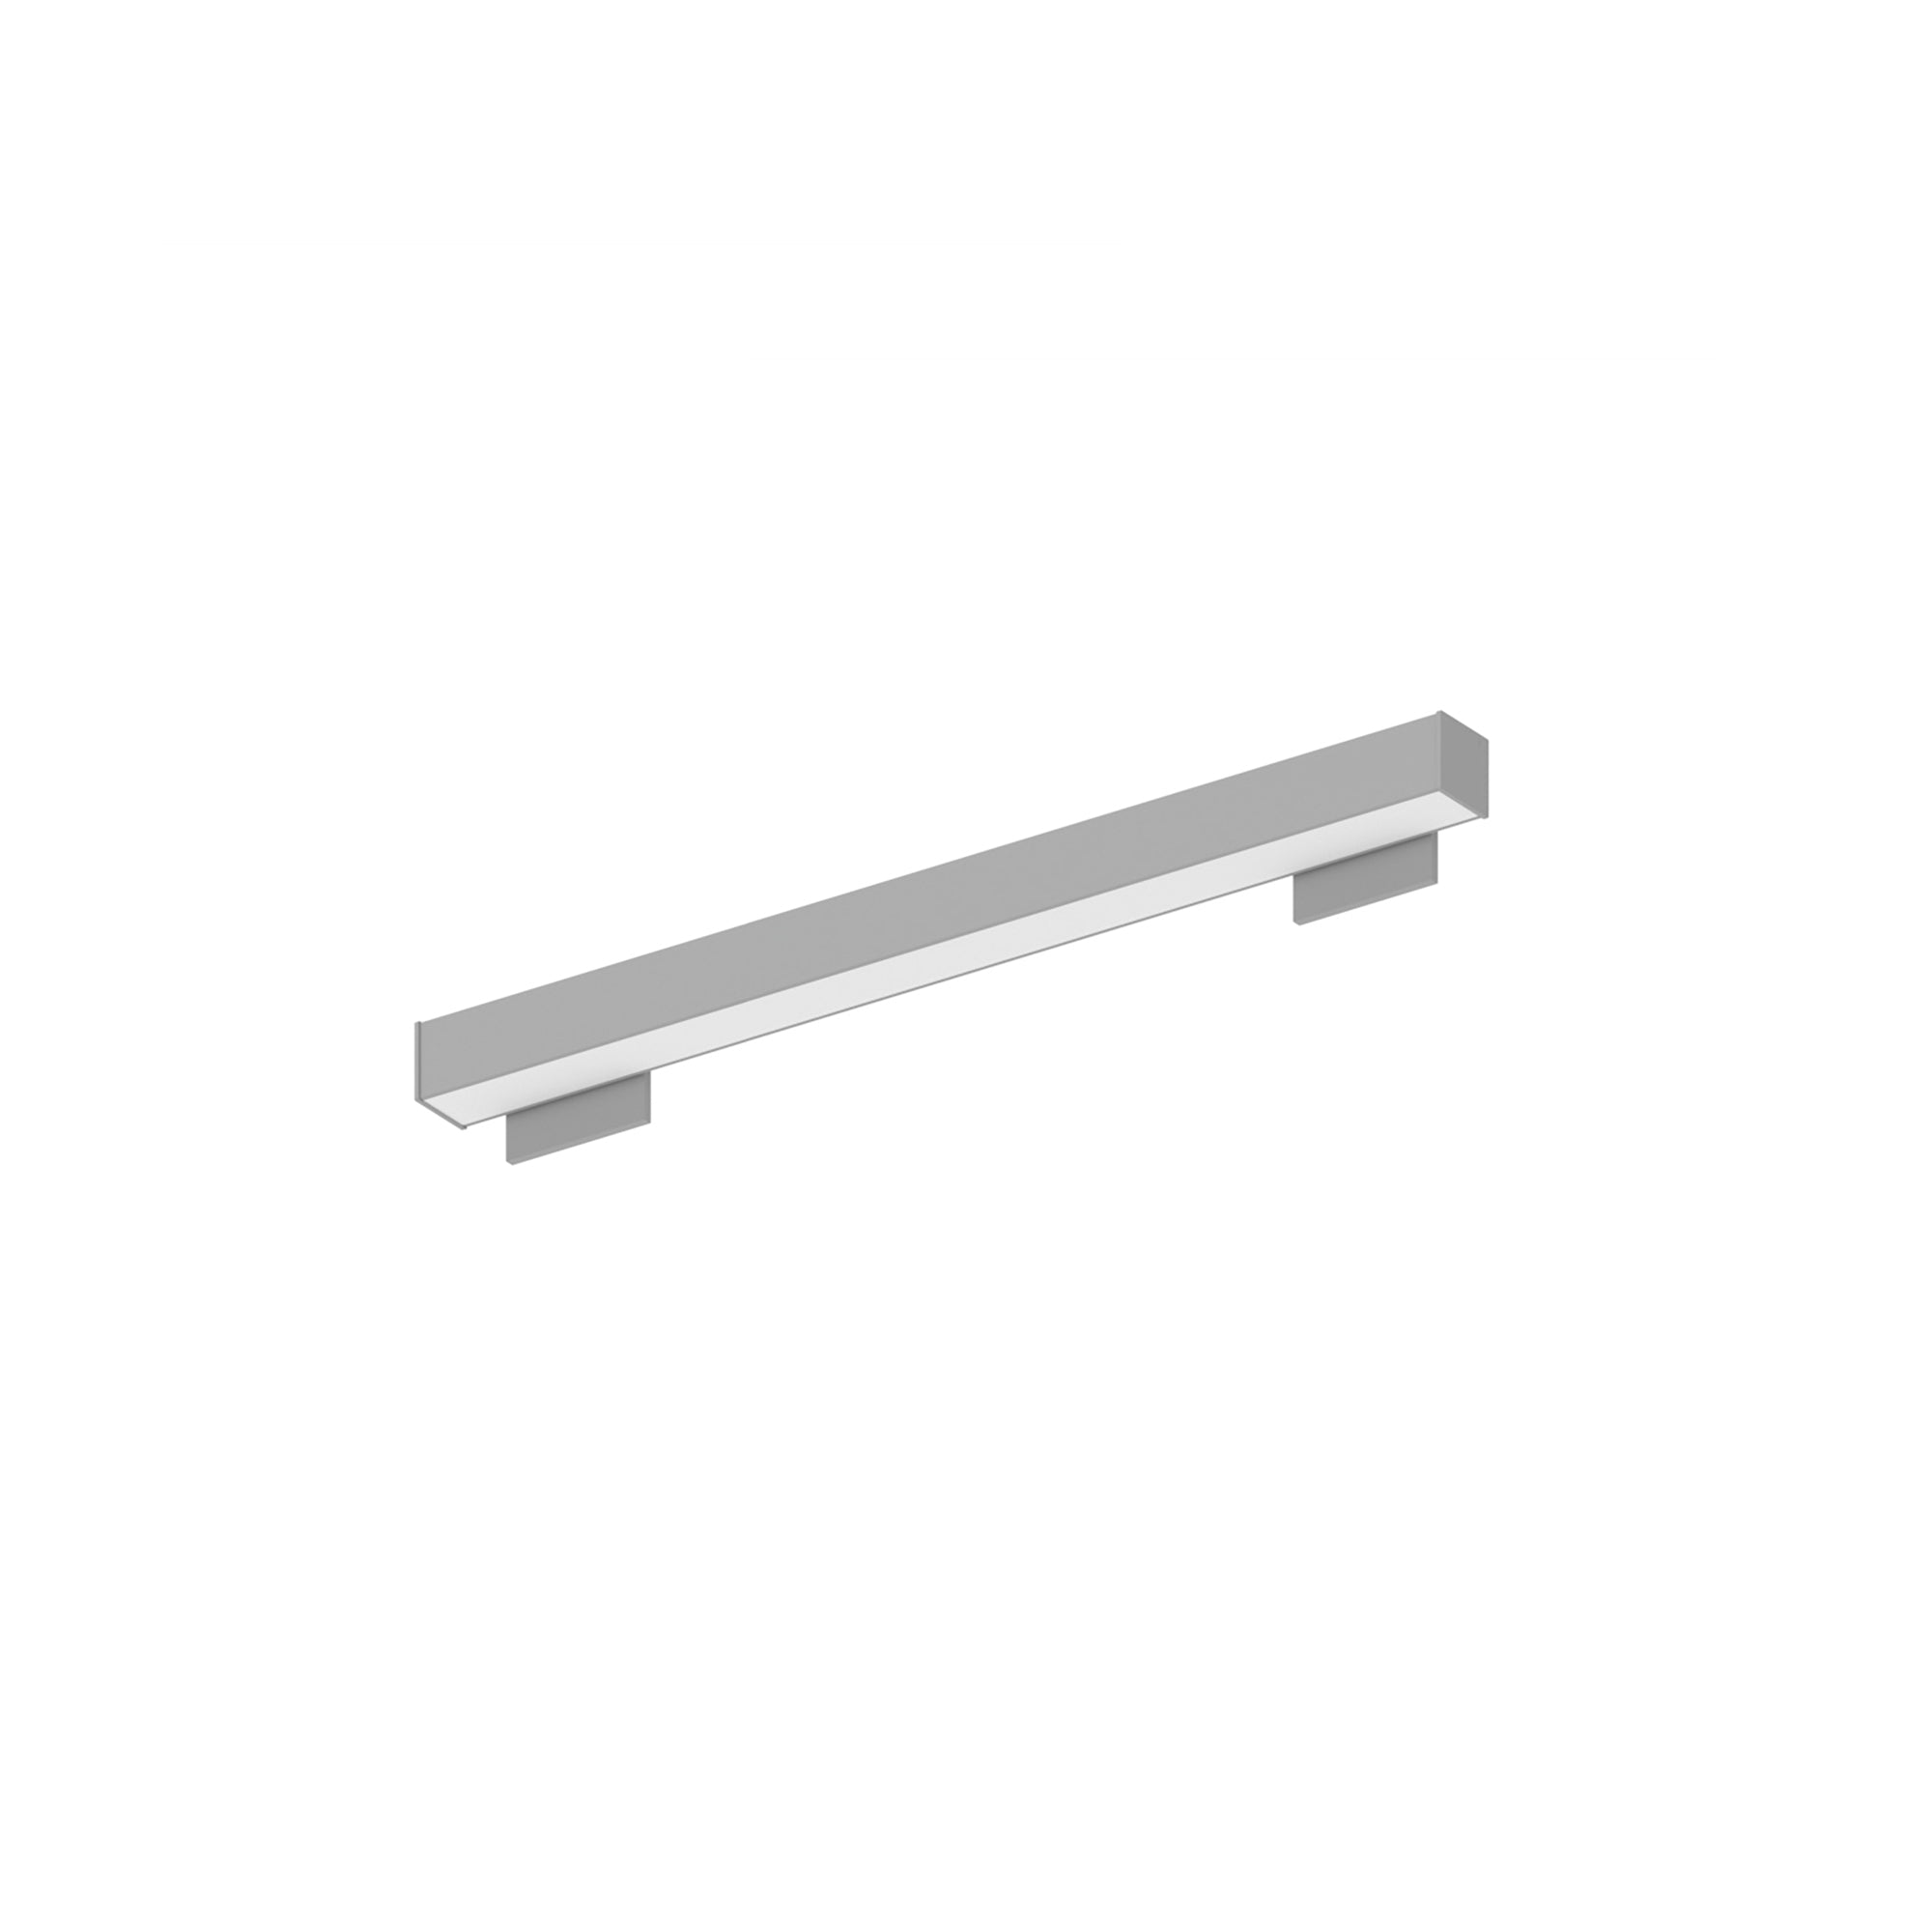 Nora Lighting NWLIN-21040A/L4-R4P - Linear - 2' L-Line LED Wall Mount Linear, 2100lm / 4000K, 4 Inchx4 Inch Left Plate & 4 Inchx4 Inch Right Plate, Right Power Feed, Aluminum Finish